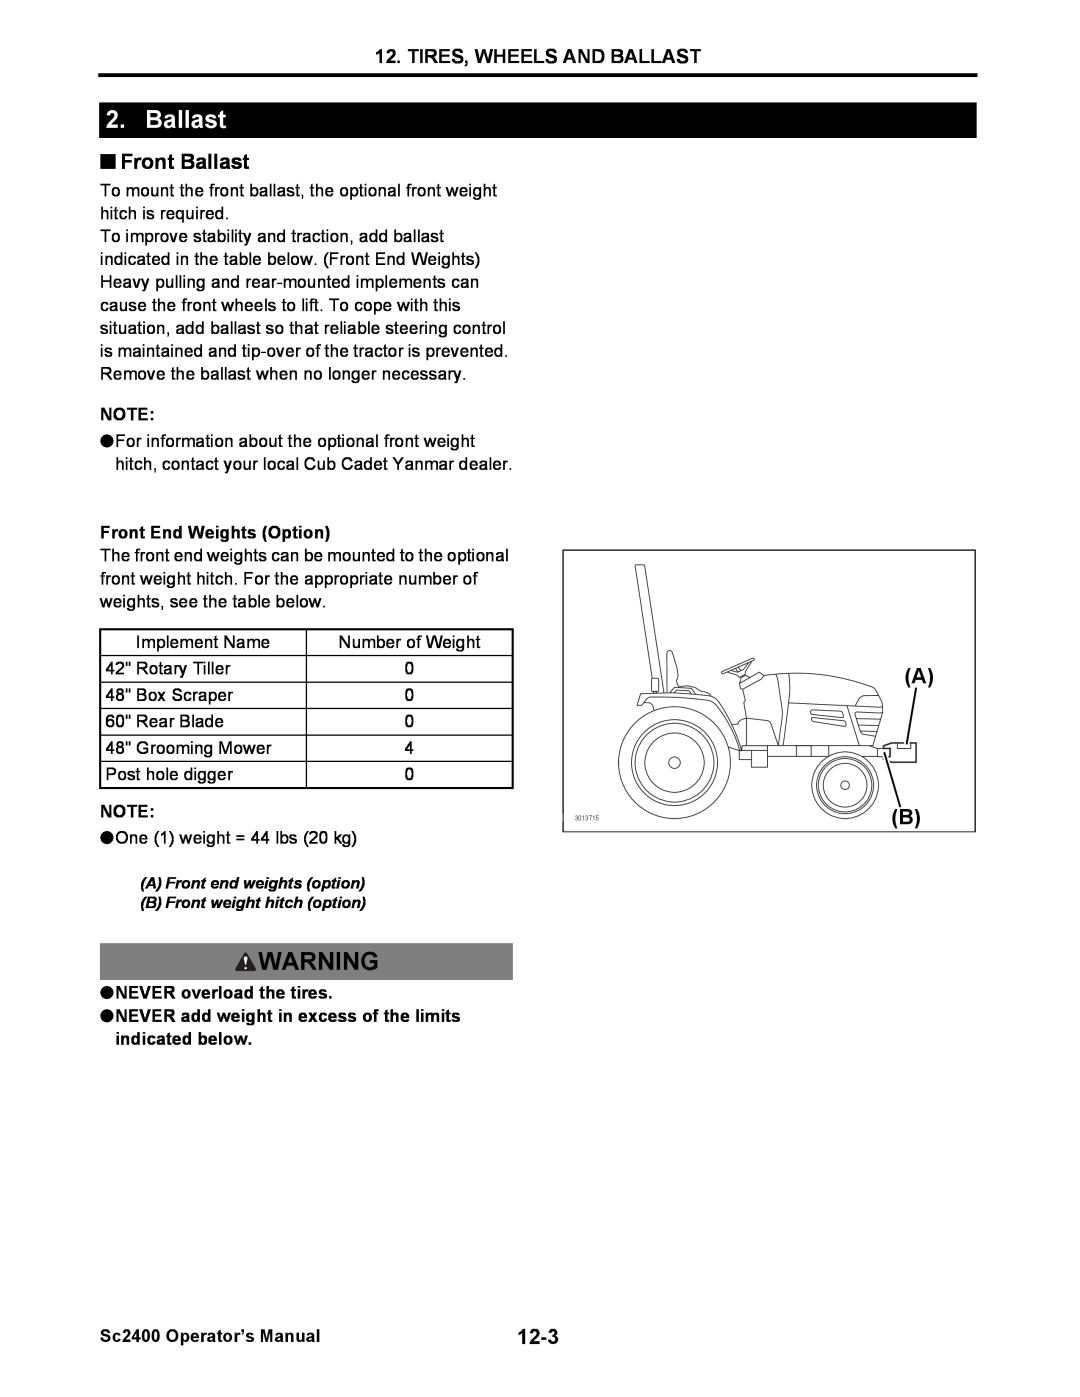 Cub Cadet SC2400 manual Tires, Wheels And Ballast, Front End Weights Option, NEVER overload the tires 